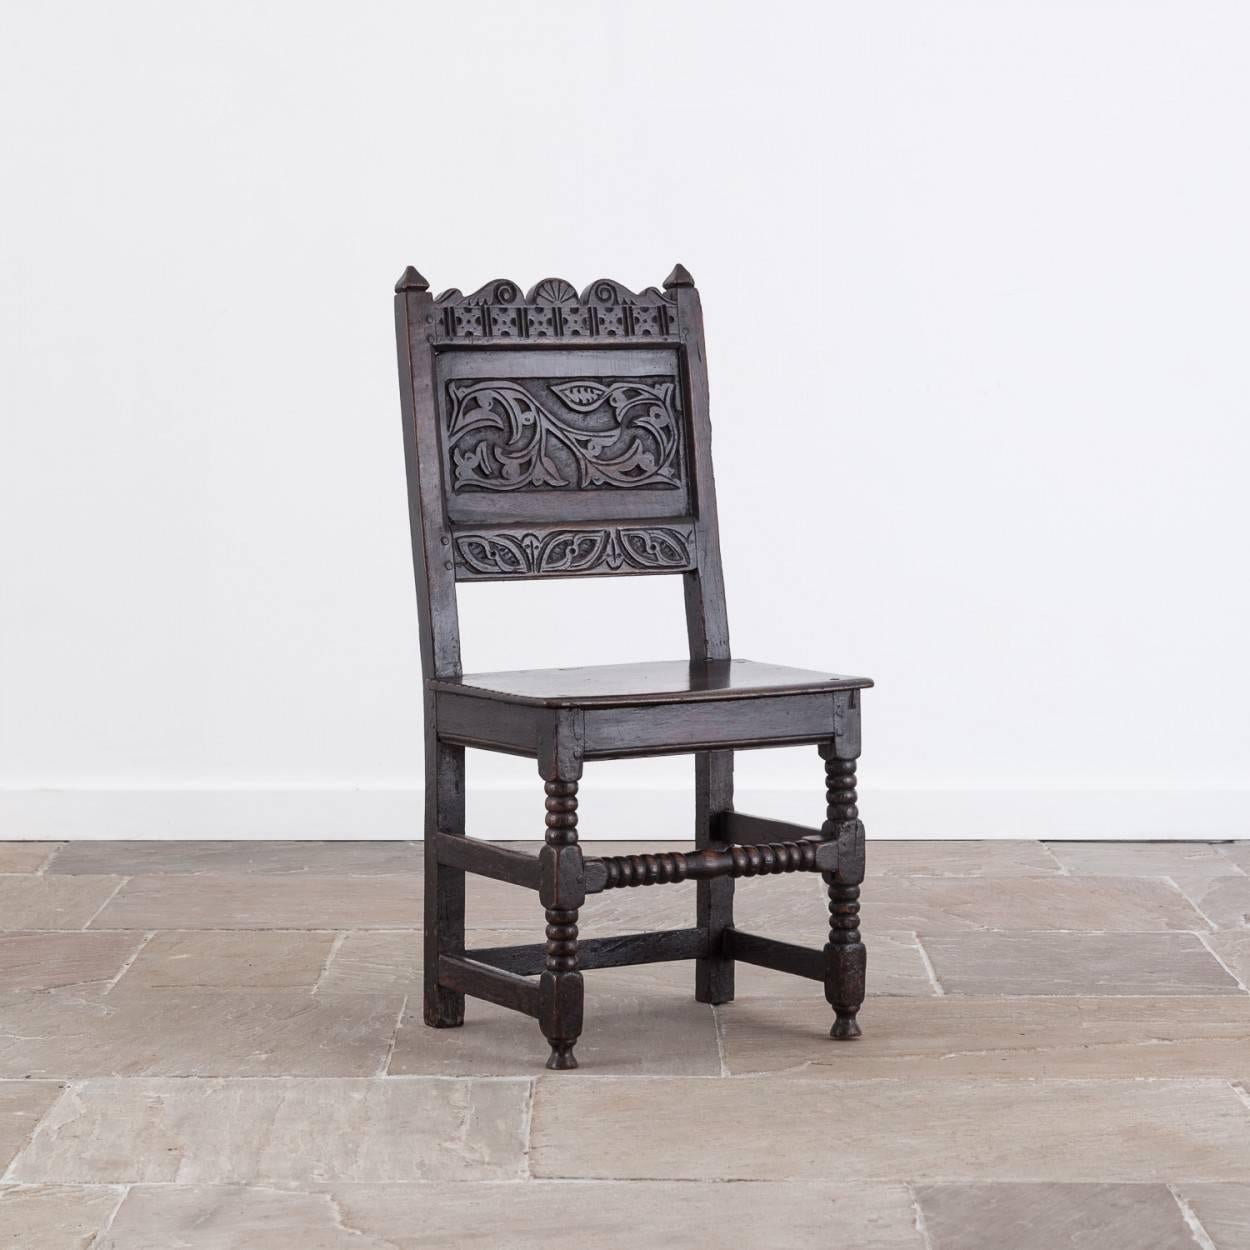 Very appealing late 17th century joined oak chair.